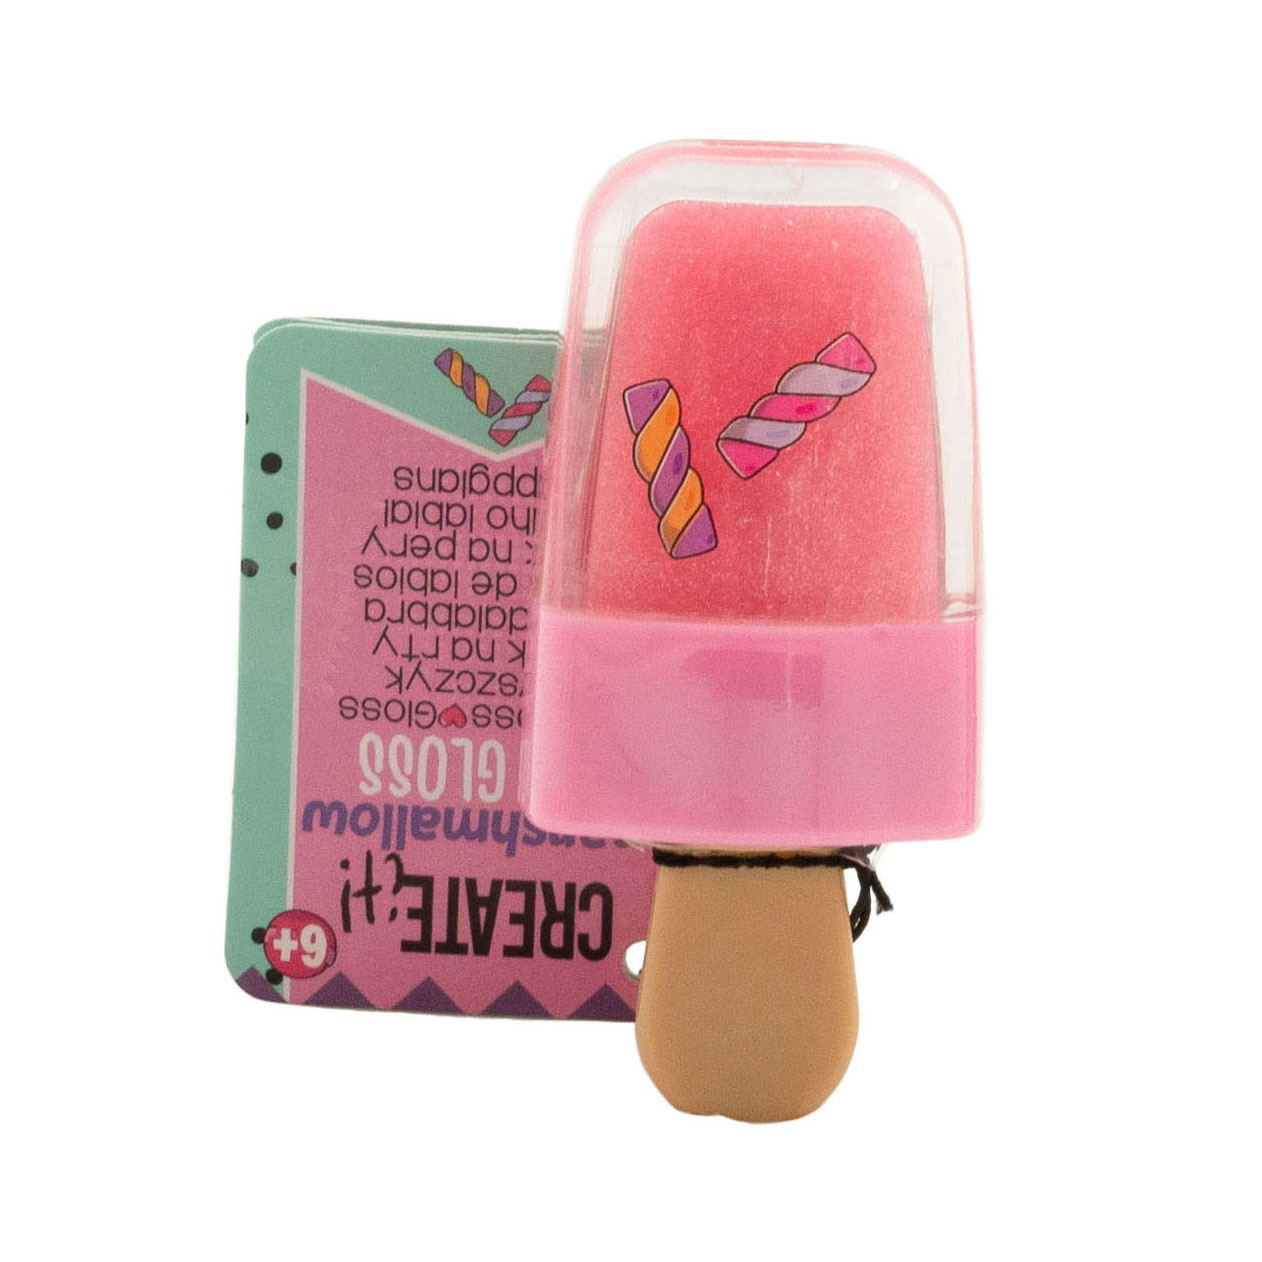 Create It! Candy Explosion Lipgloss Lollipop